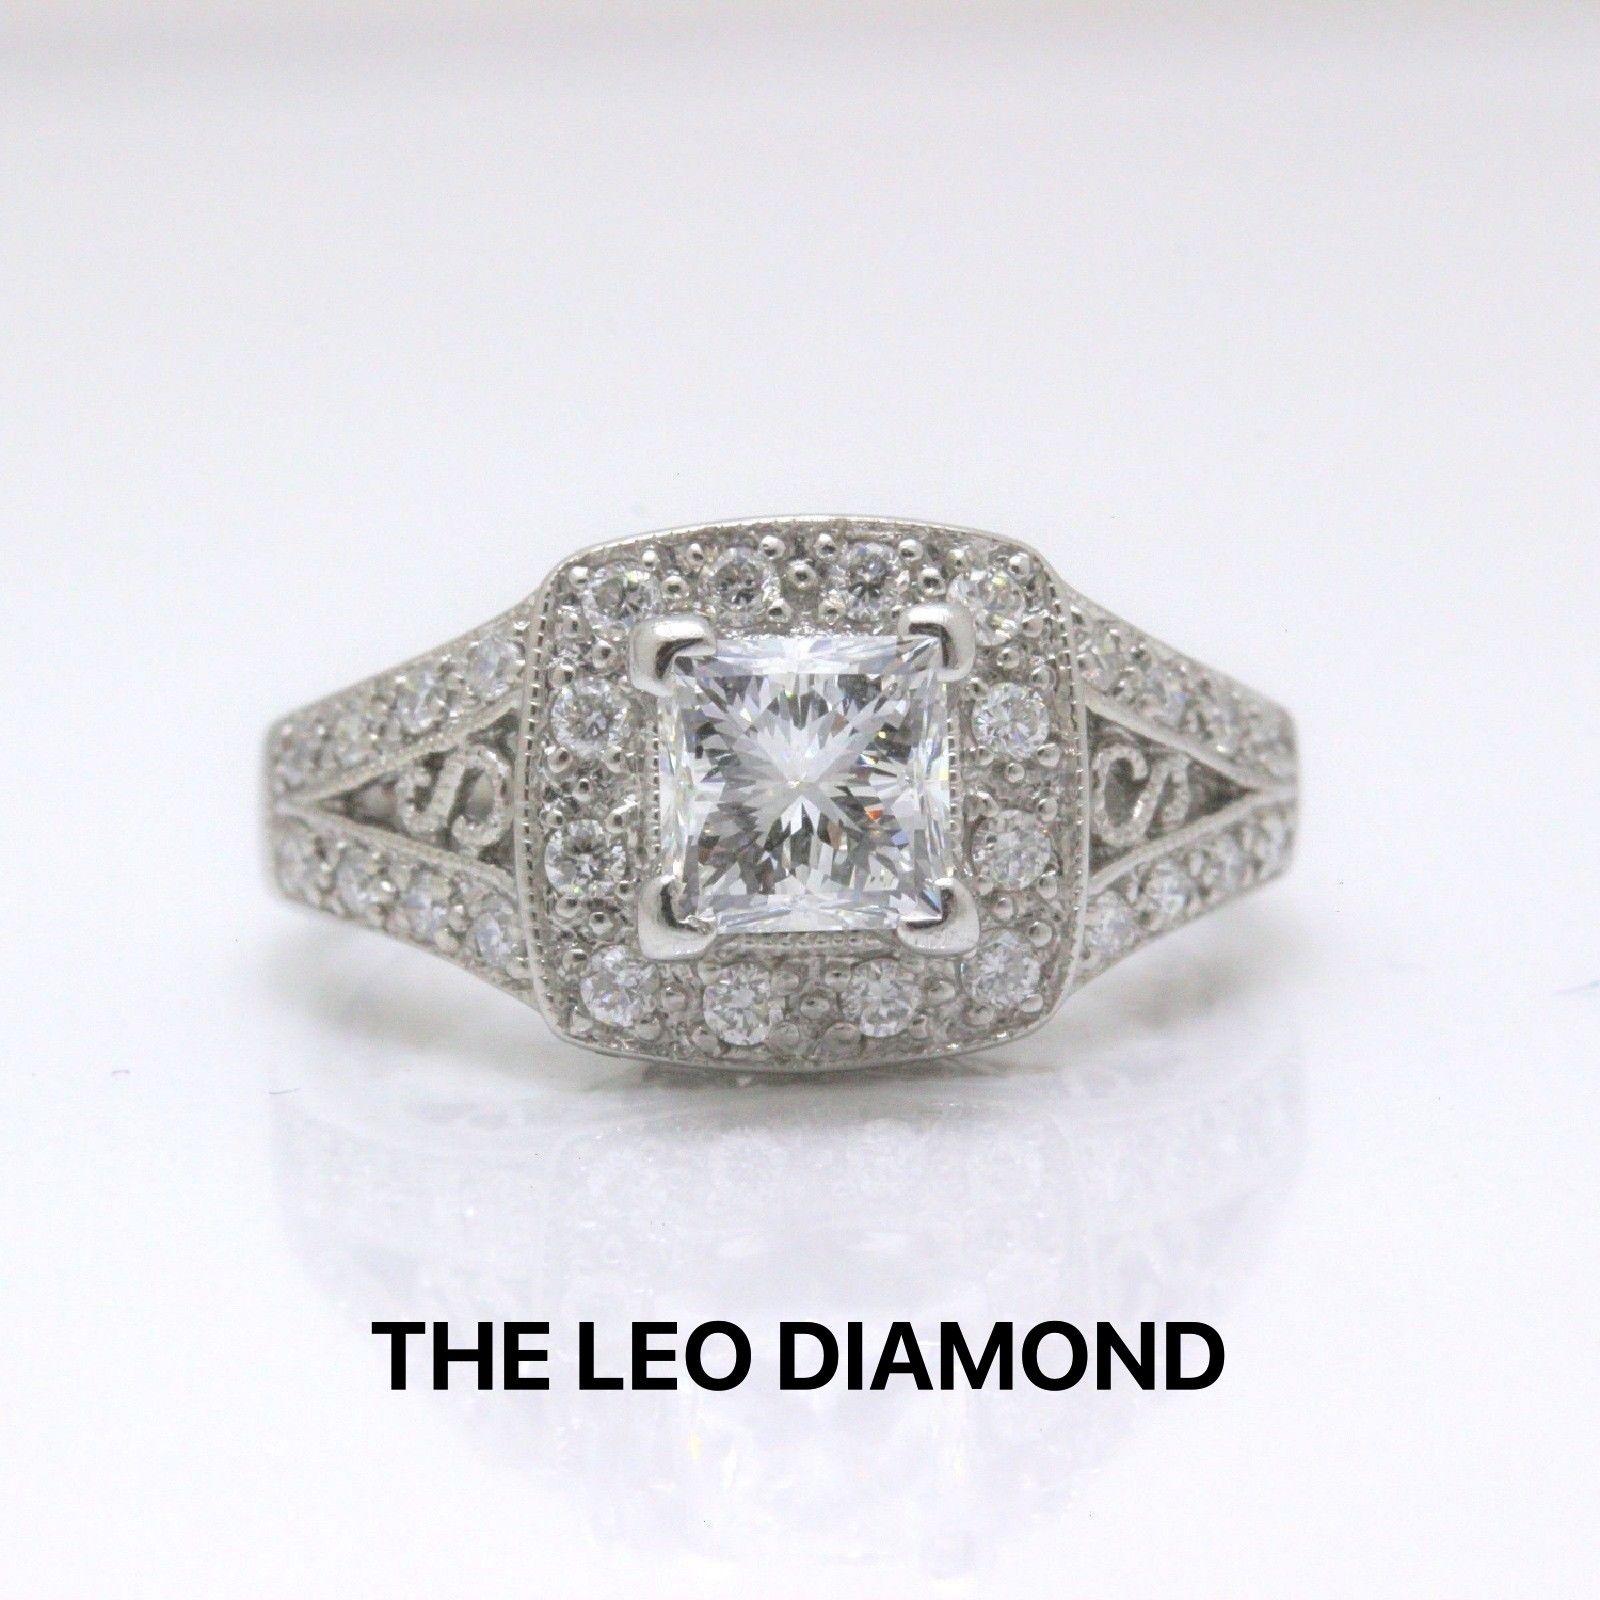 THE LEO DIAMOND
Style:  Solitaire set in Diamond Pave Engagement Ring
Serial Number:  LEO-61404S
Metal: 14KT White Gold
Size:  5.25 - sizable
Total Carat Weight:  1.32 TCW
Diamond Shape:  Leo Princess Cut
Center Stone Weight: 0.98 CTS
Diamond Color